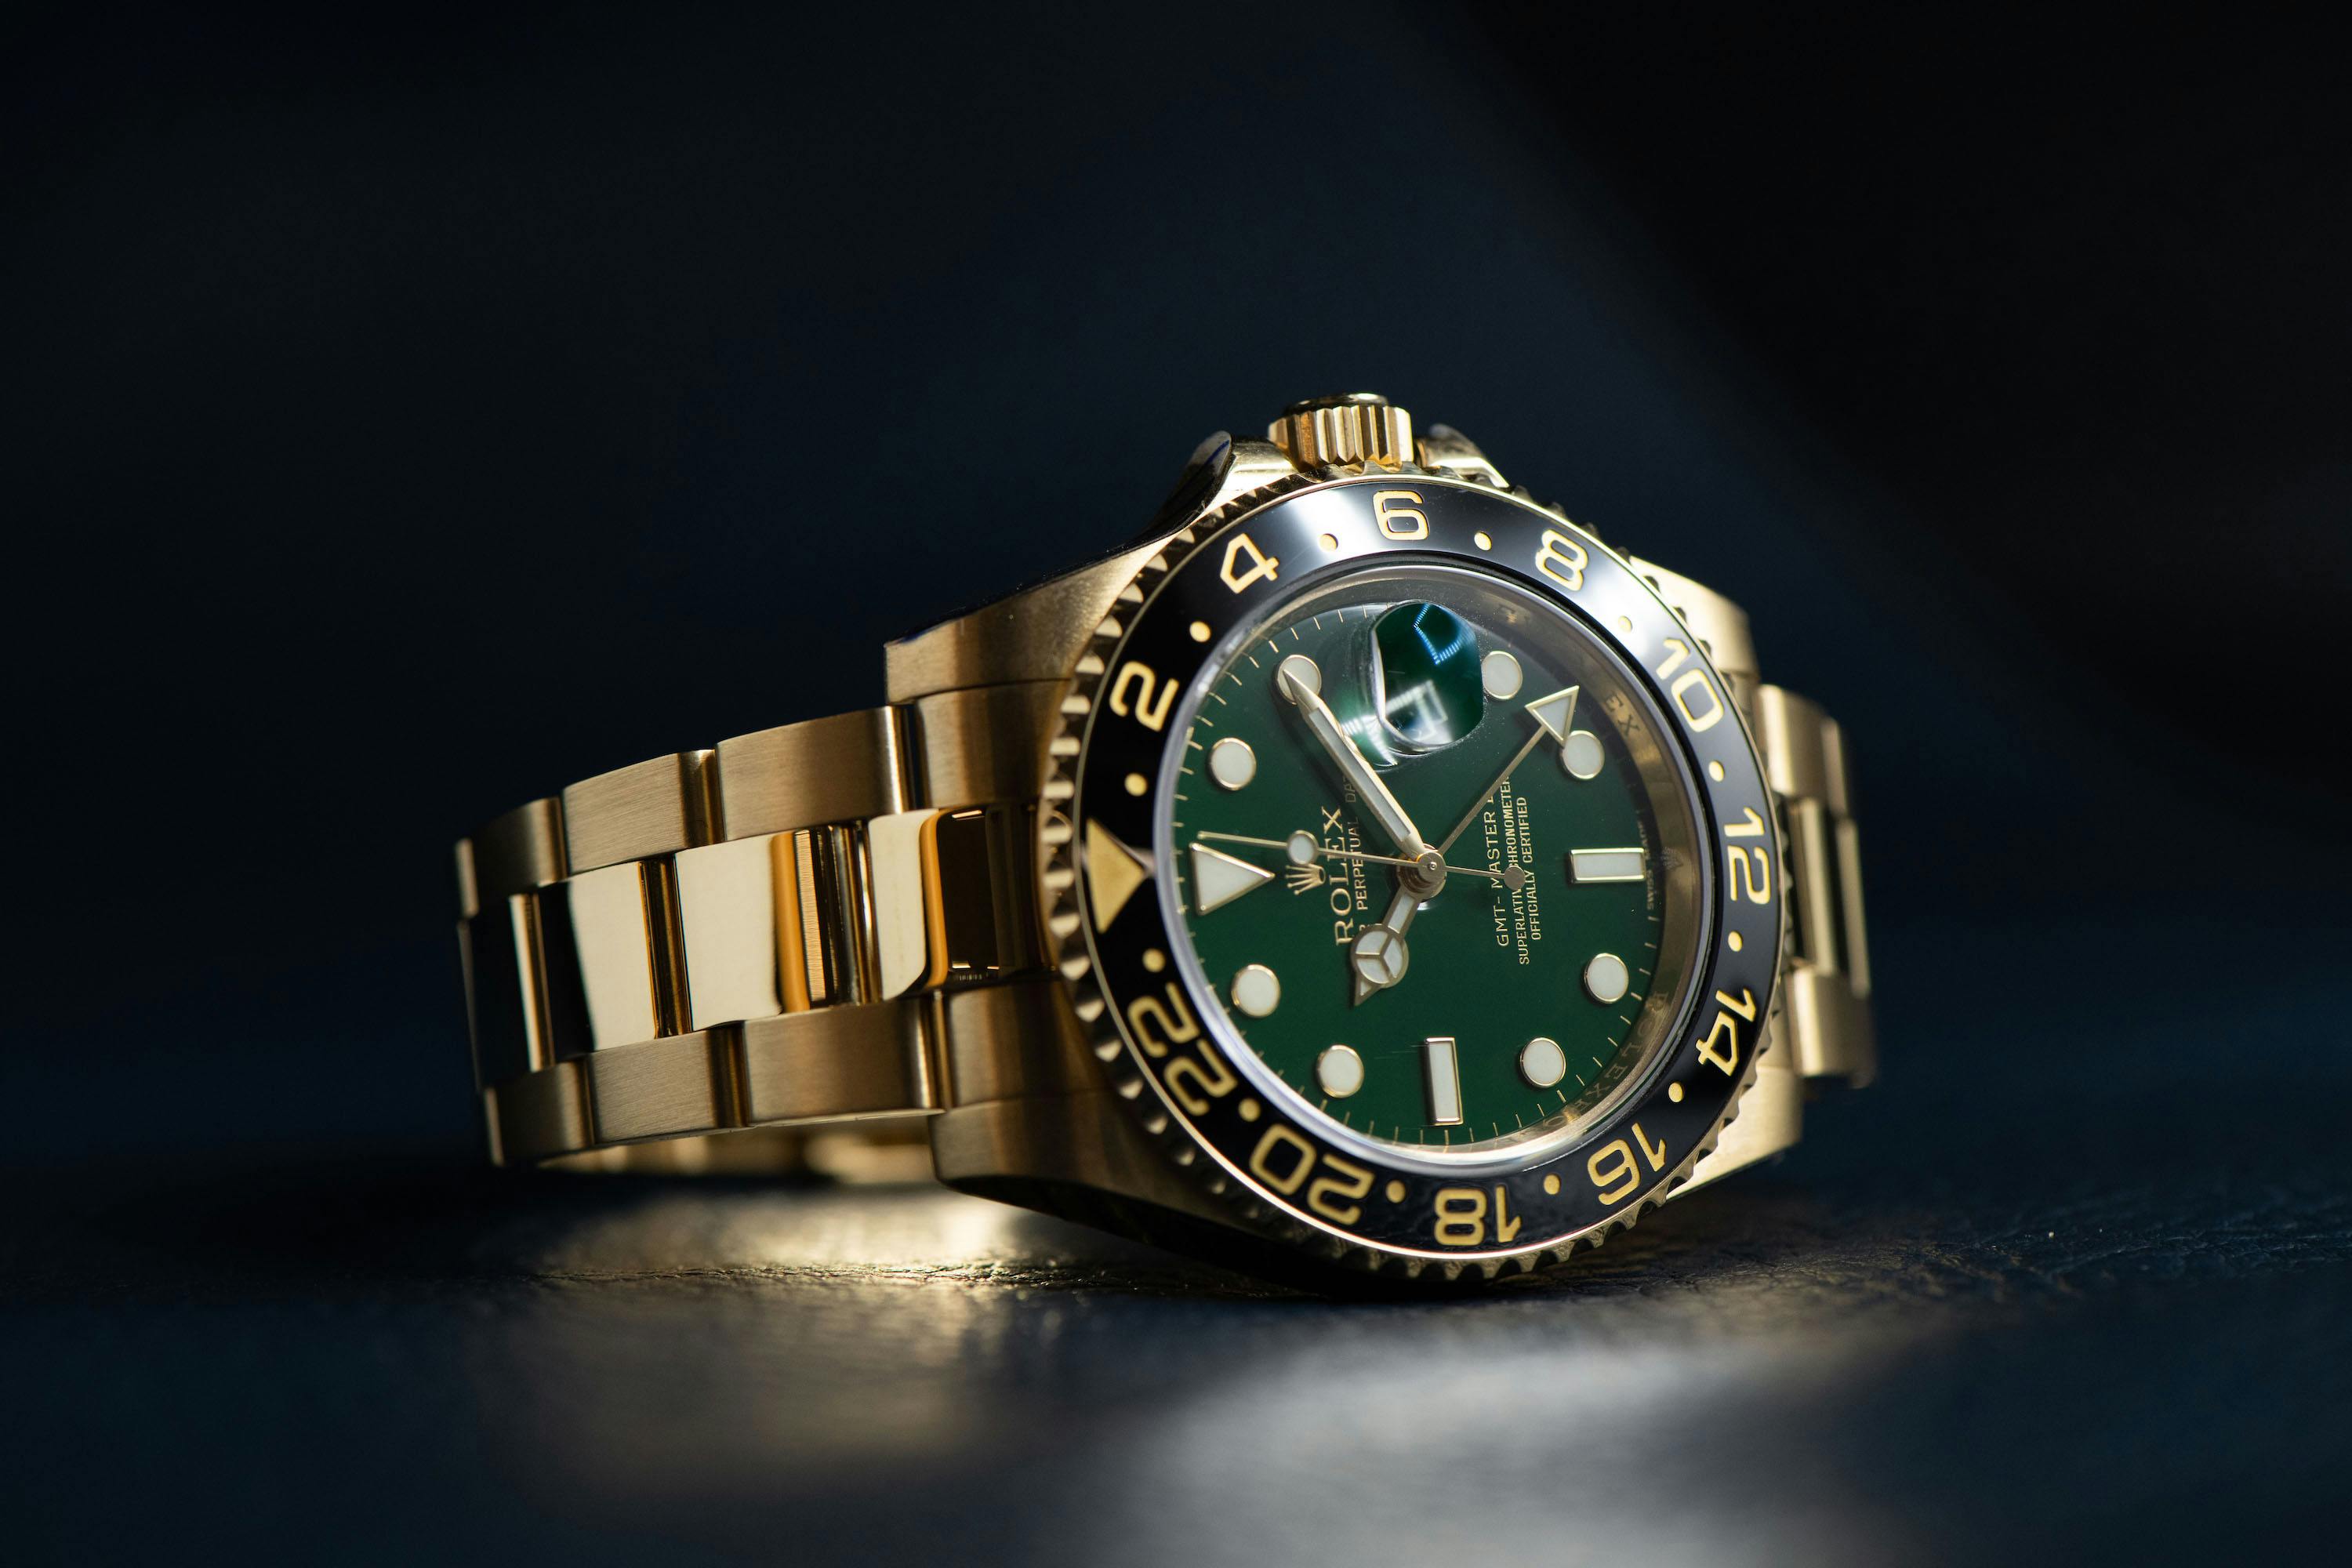 2008 Rolex GMT-Master II for sale by auction in London, United Kingdom